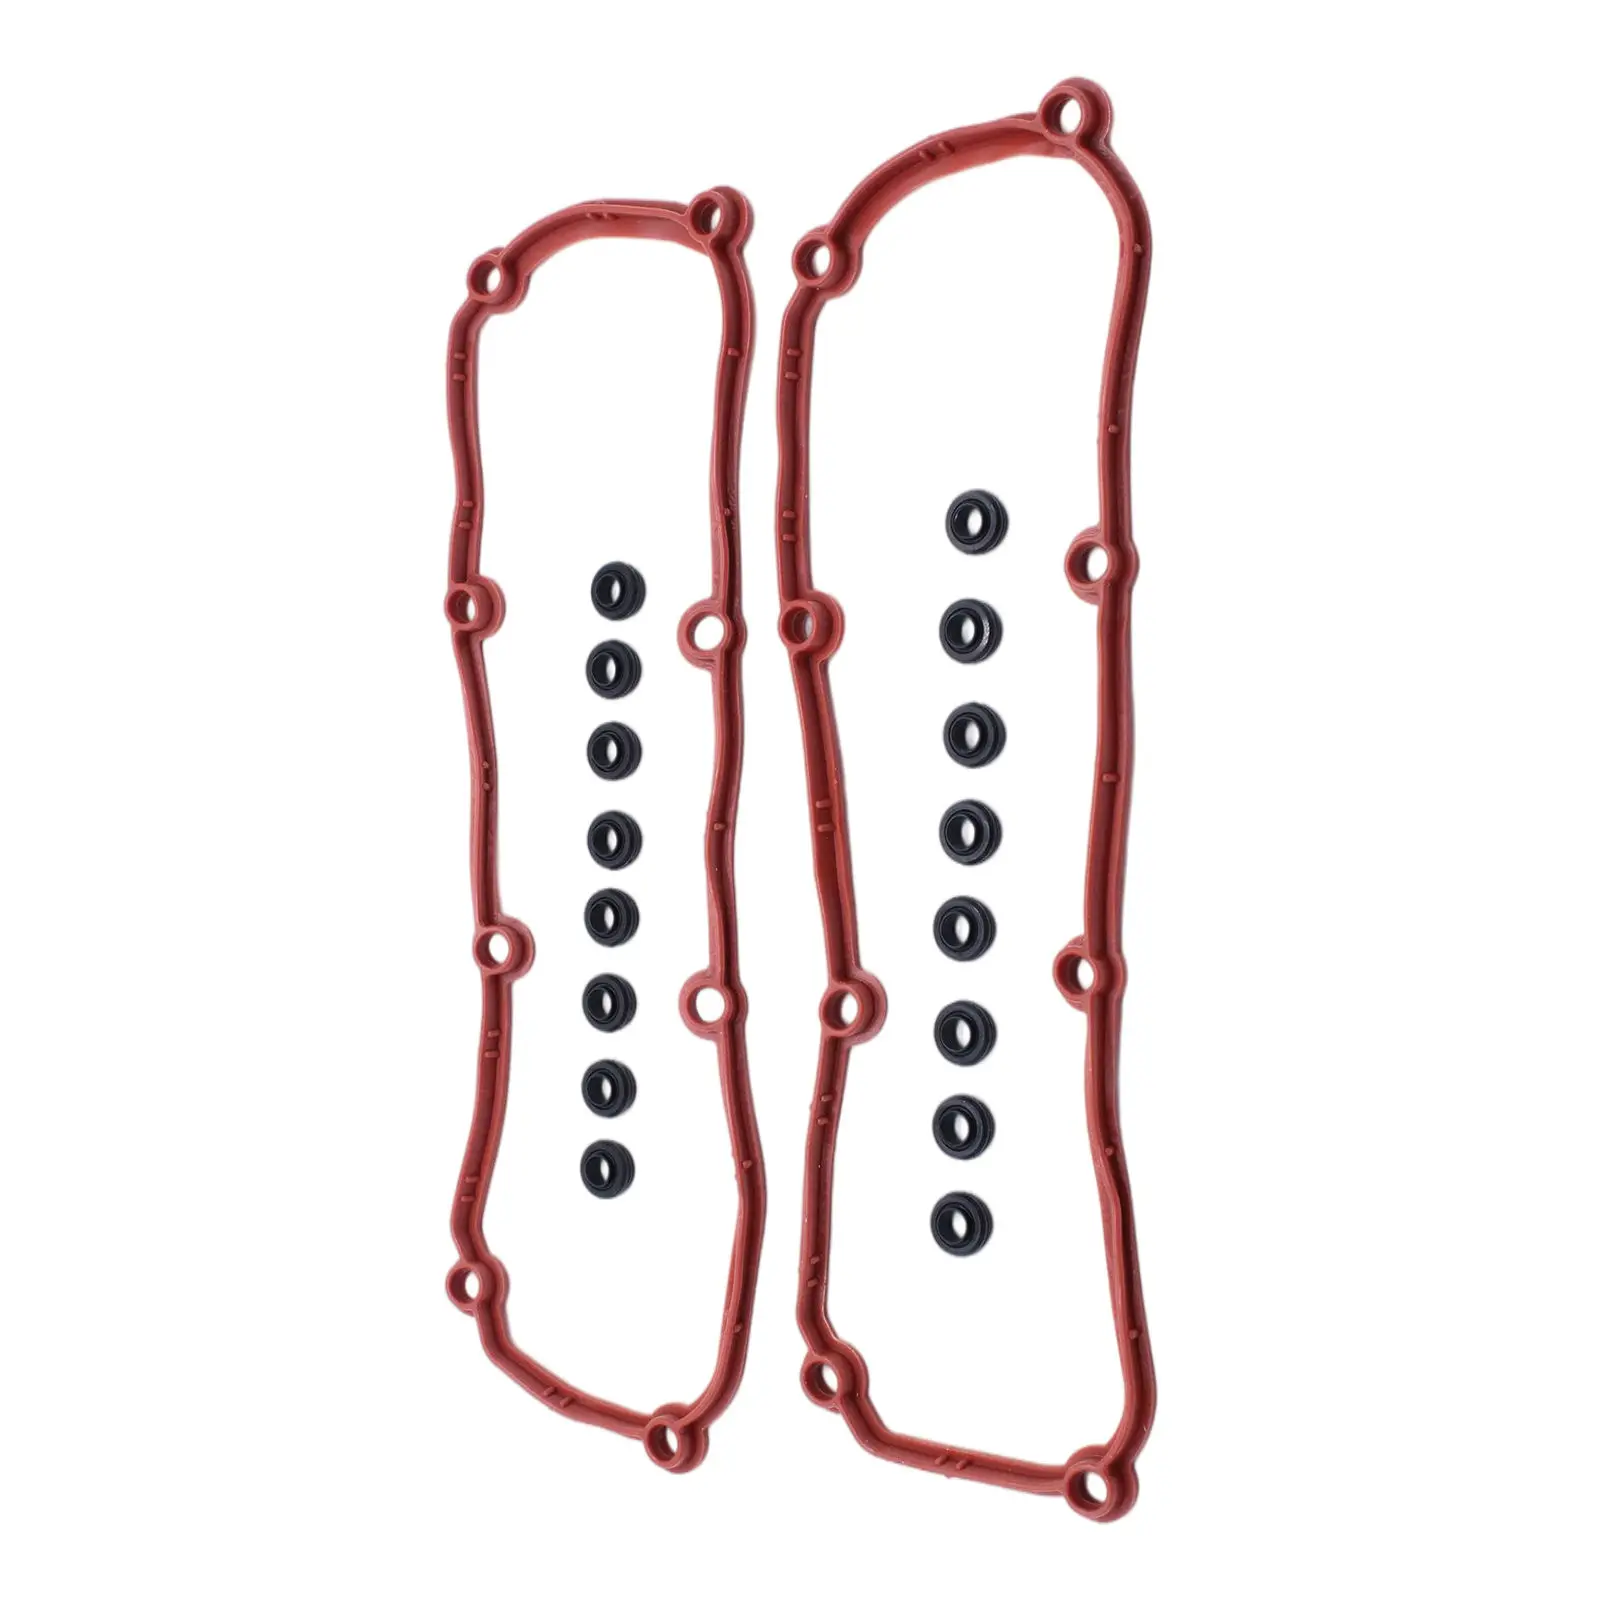 2Pcs Valve Cover Gasket Kit Fit for Grand Caravan Town & Country 12V